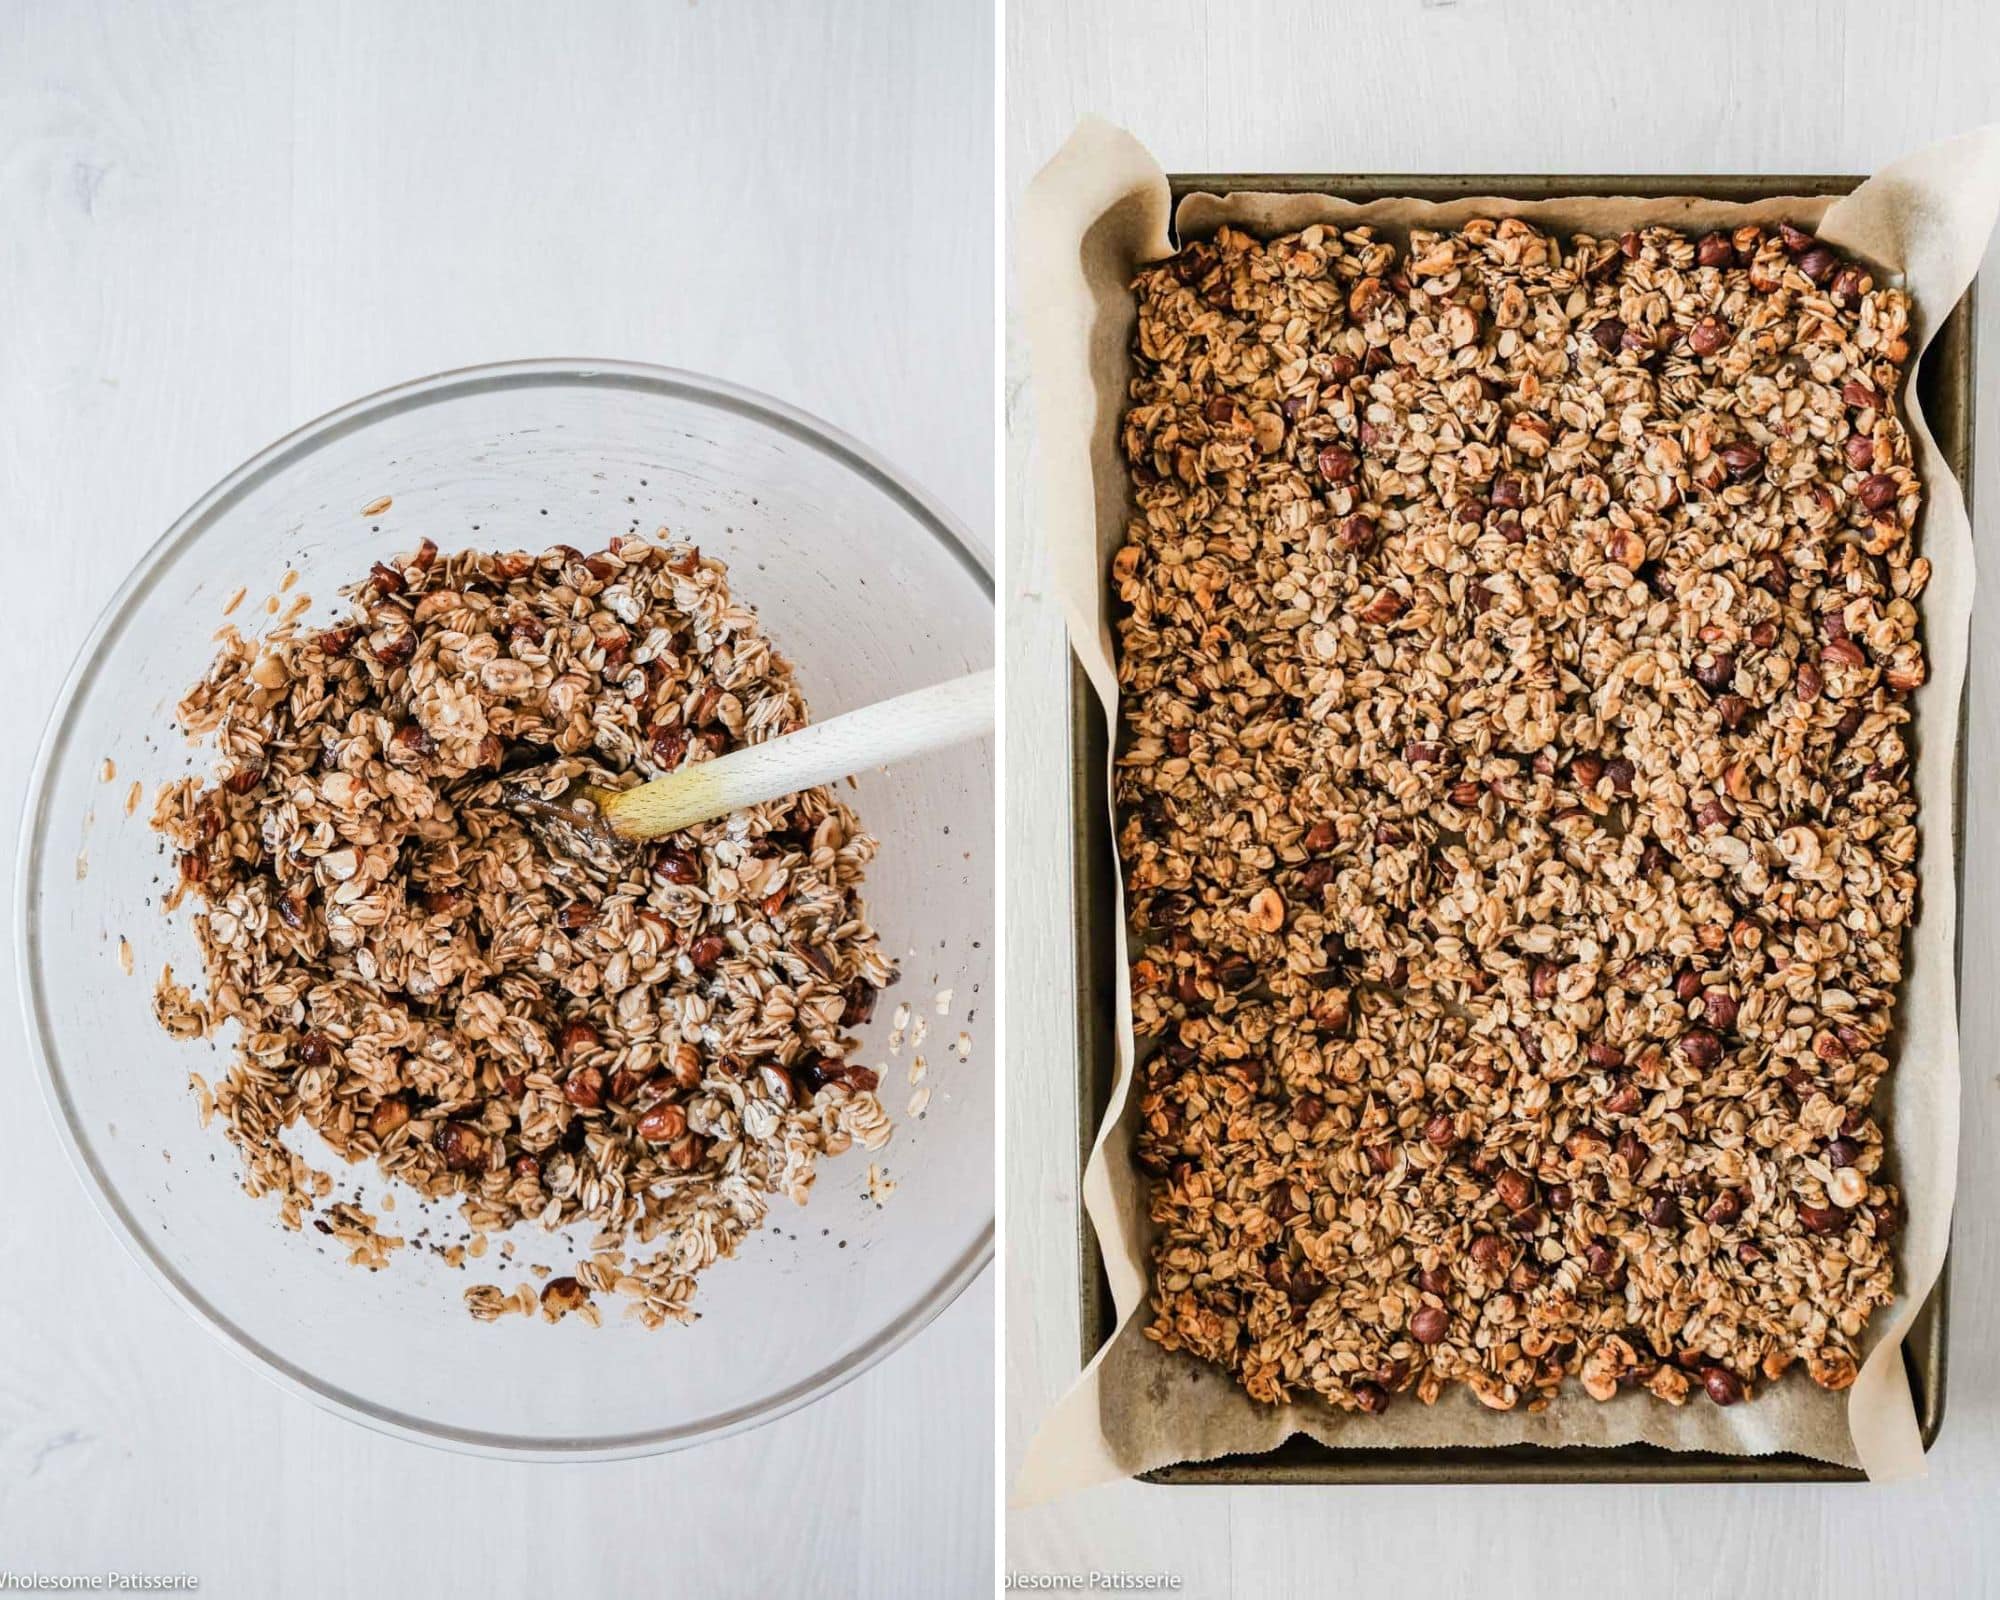 Mixing banana bread granola ingredients in bowl and spread out onto lined baking sheet.